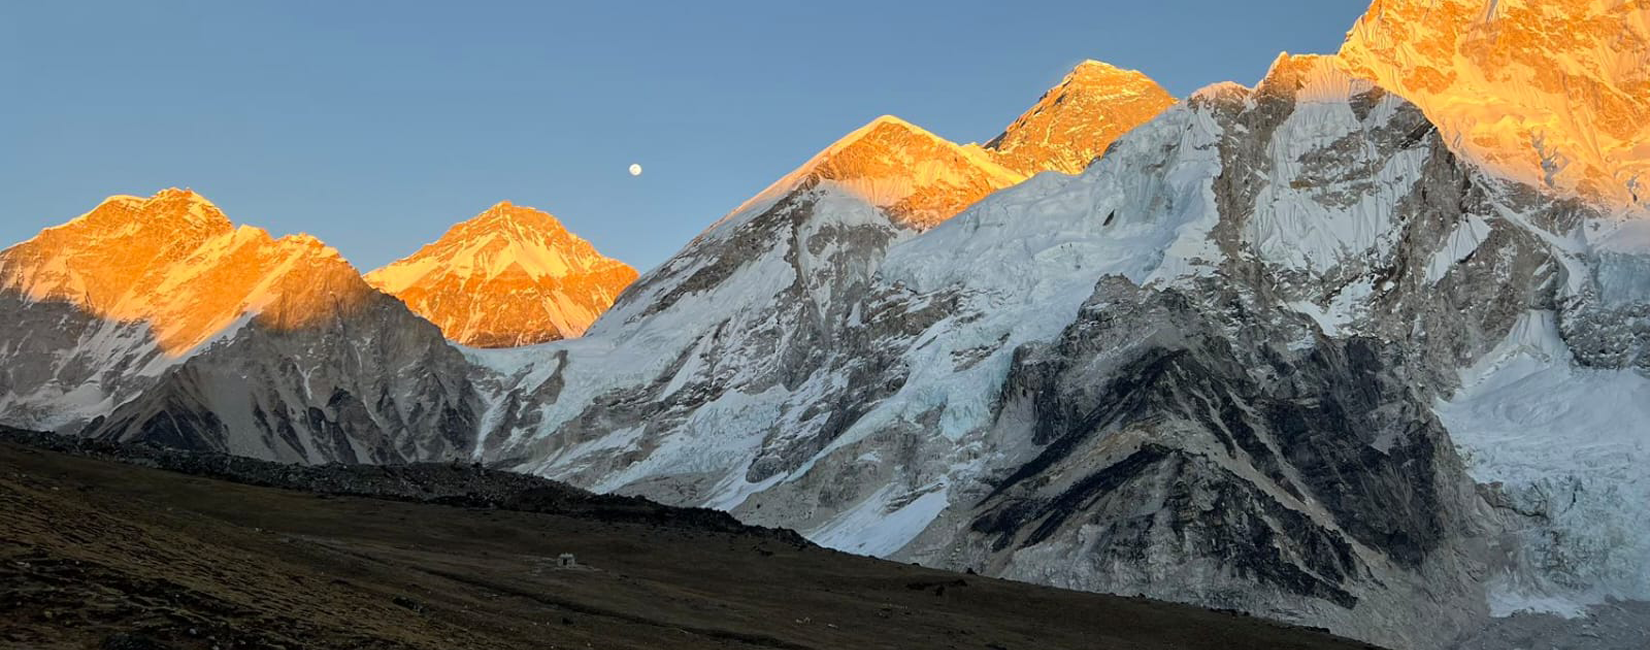 Sunset view from Everest Region